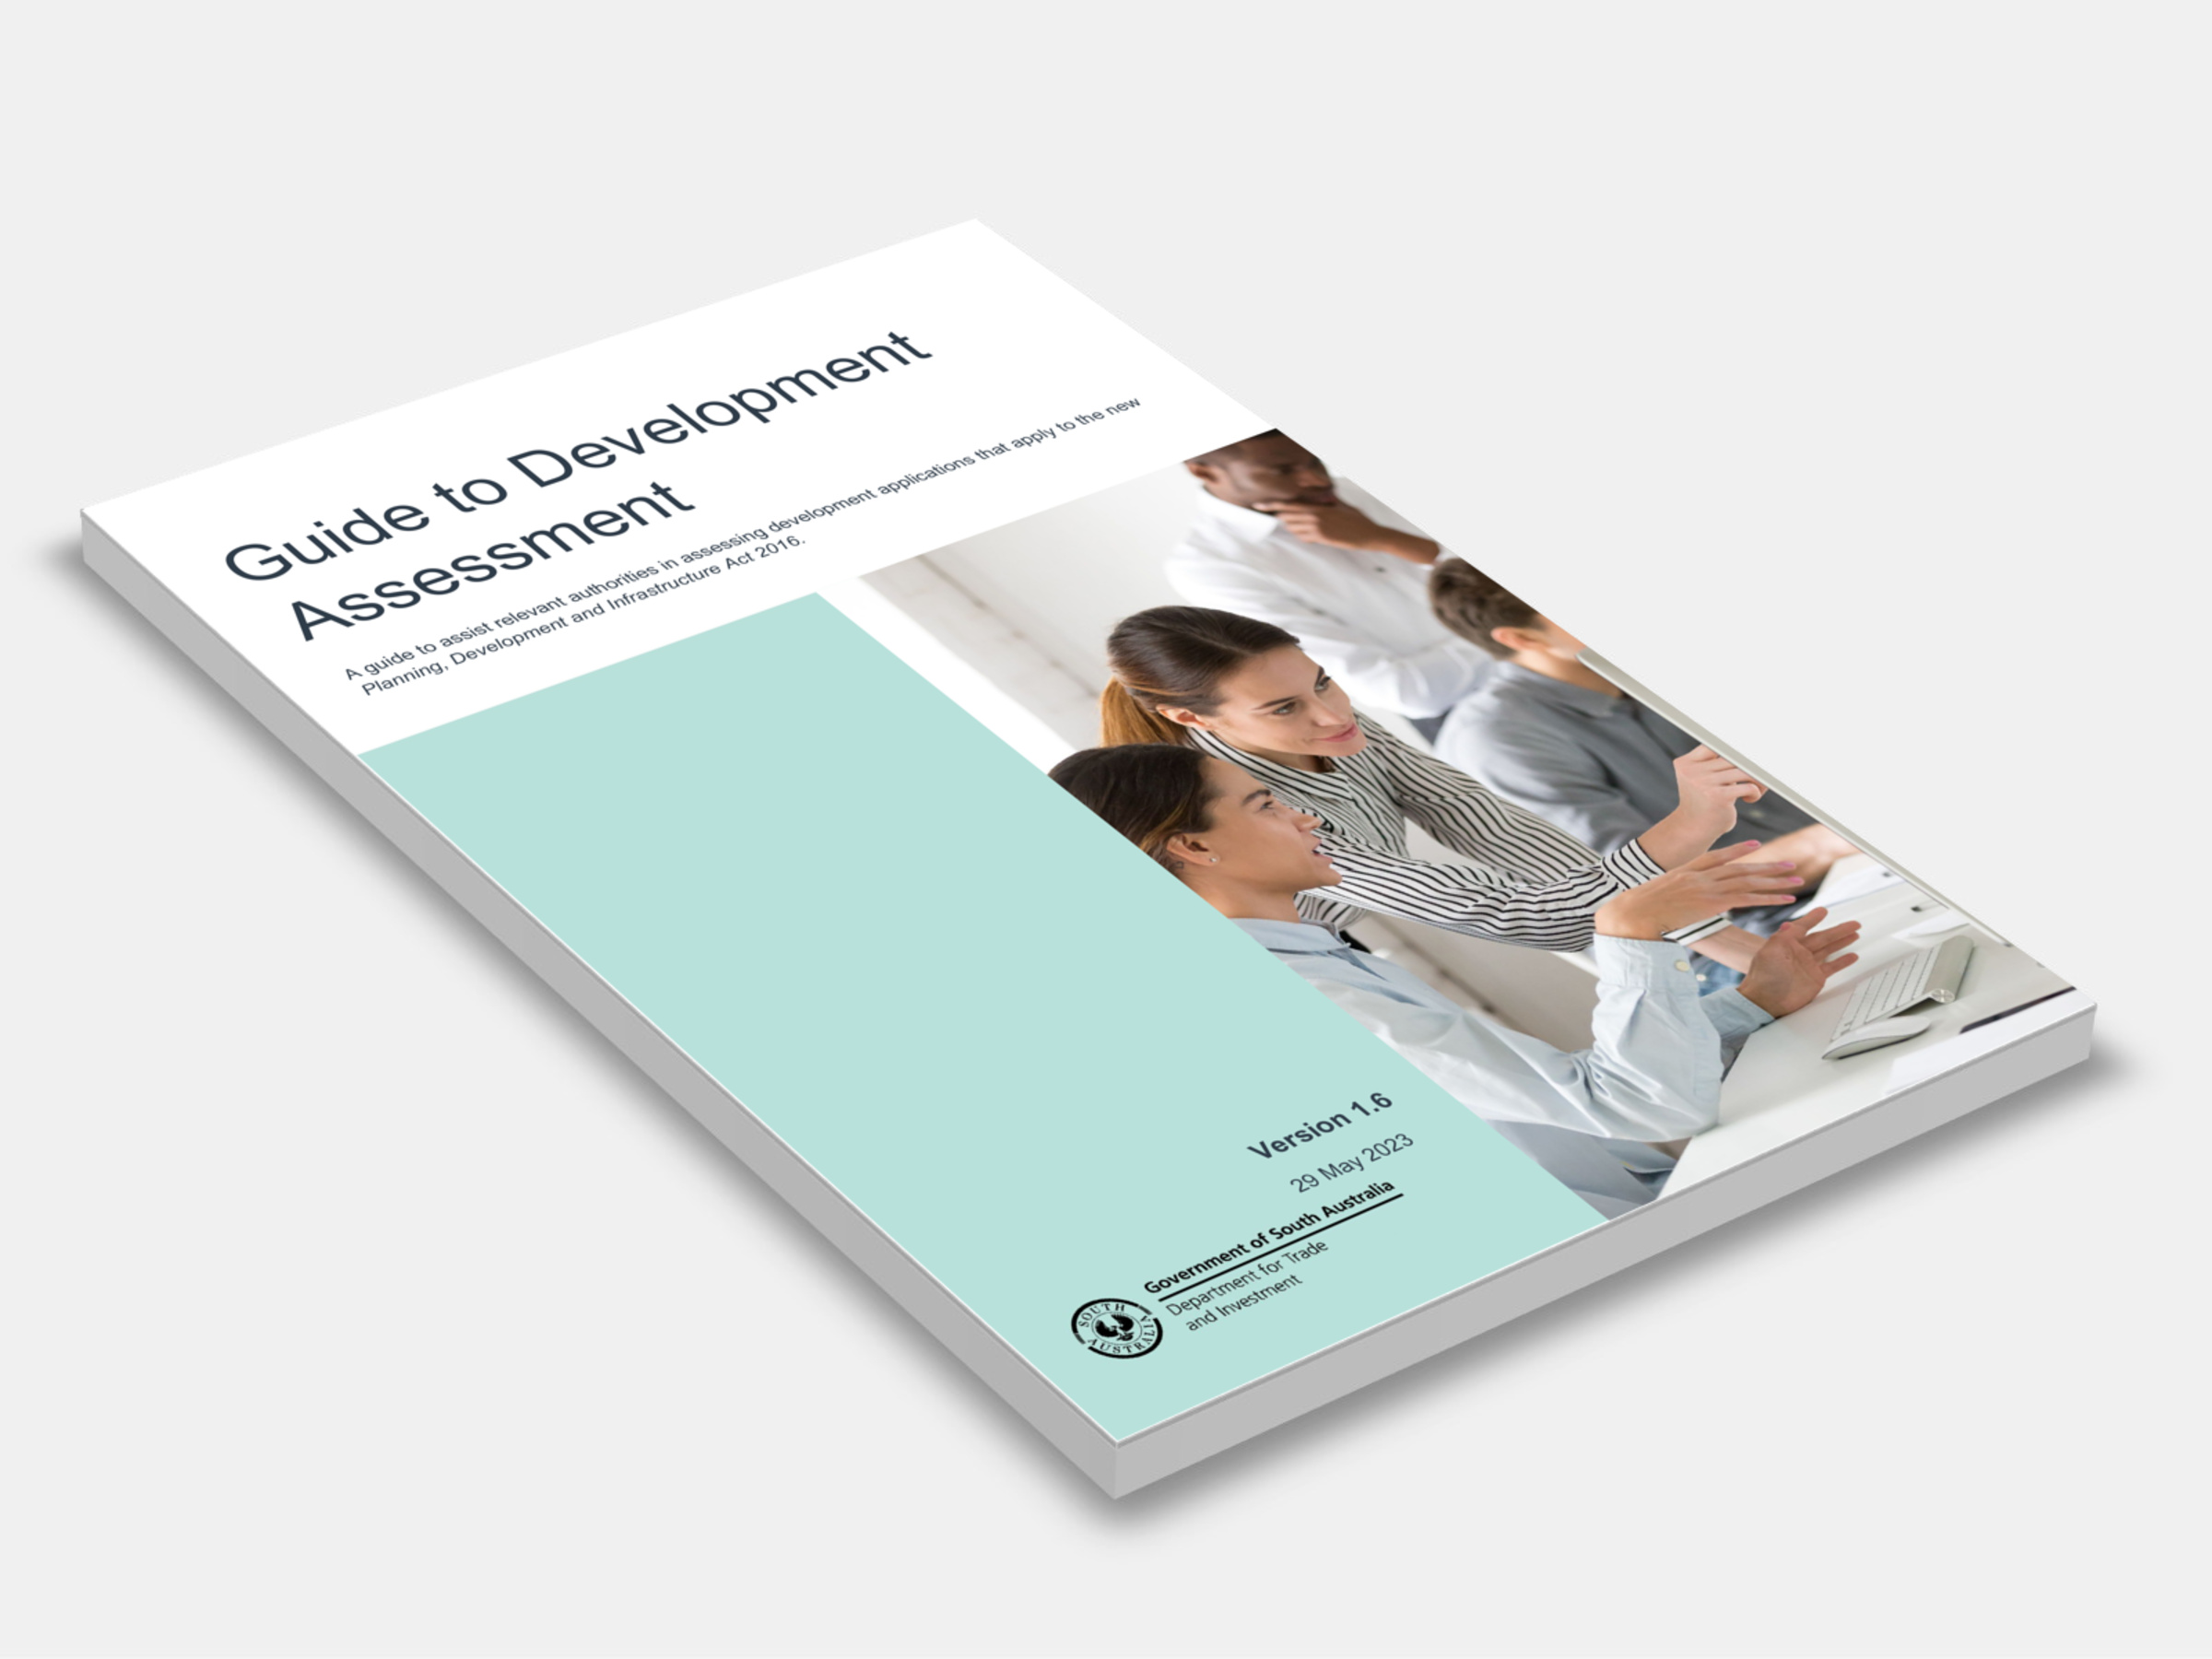 Guide-to-Development-Assessment-PDI-Act 2023 cover